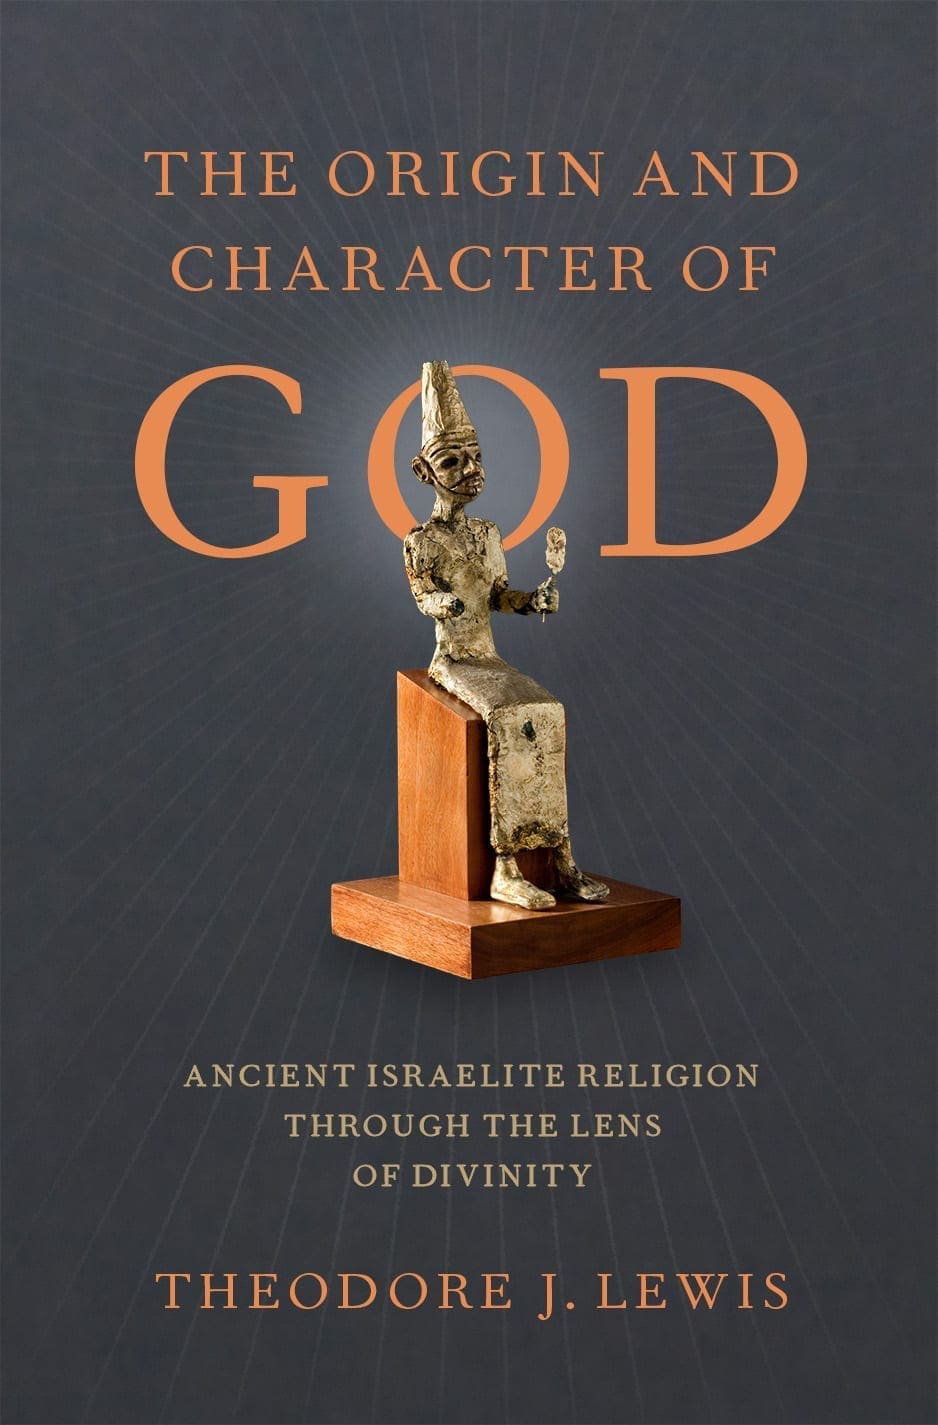 The Origin and Character of God: Ancient Israelite Religion Through the Lens of Divinity